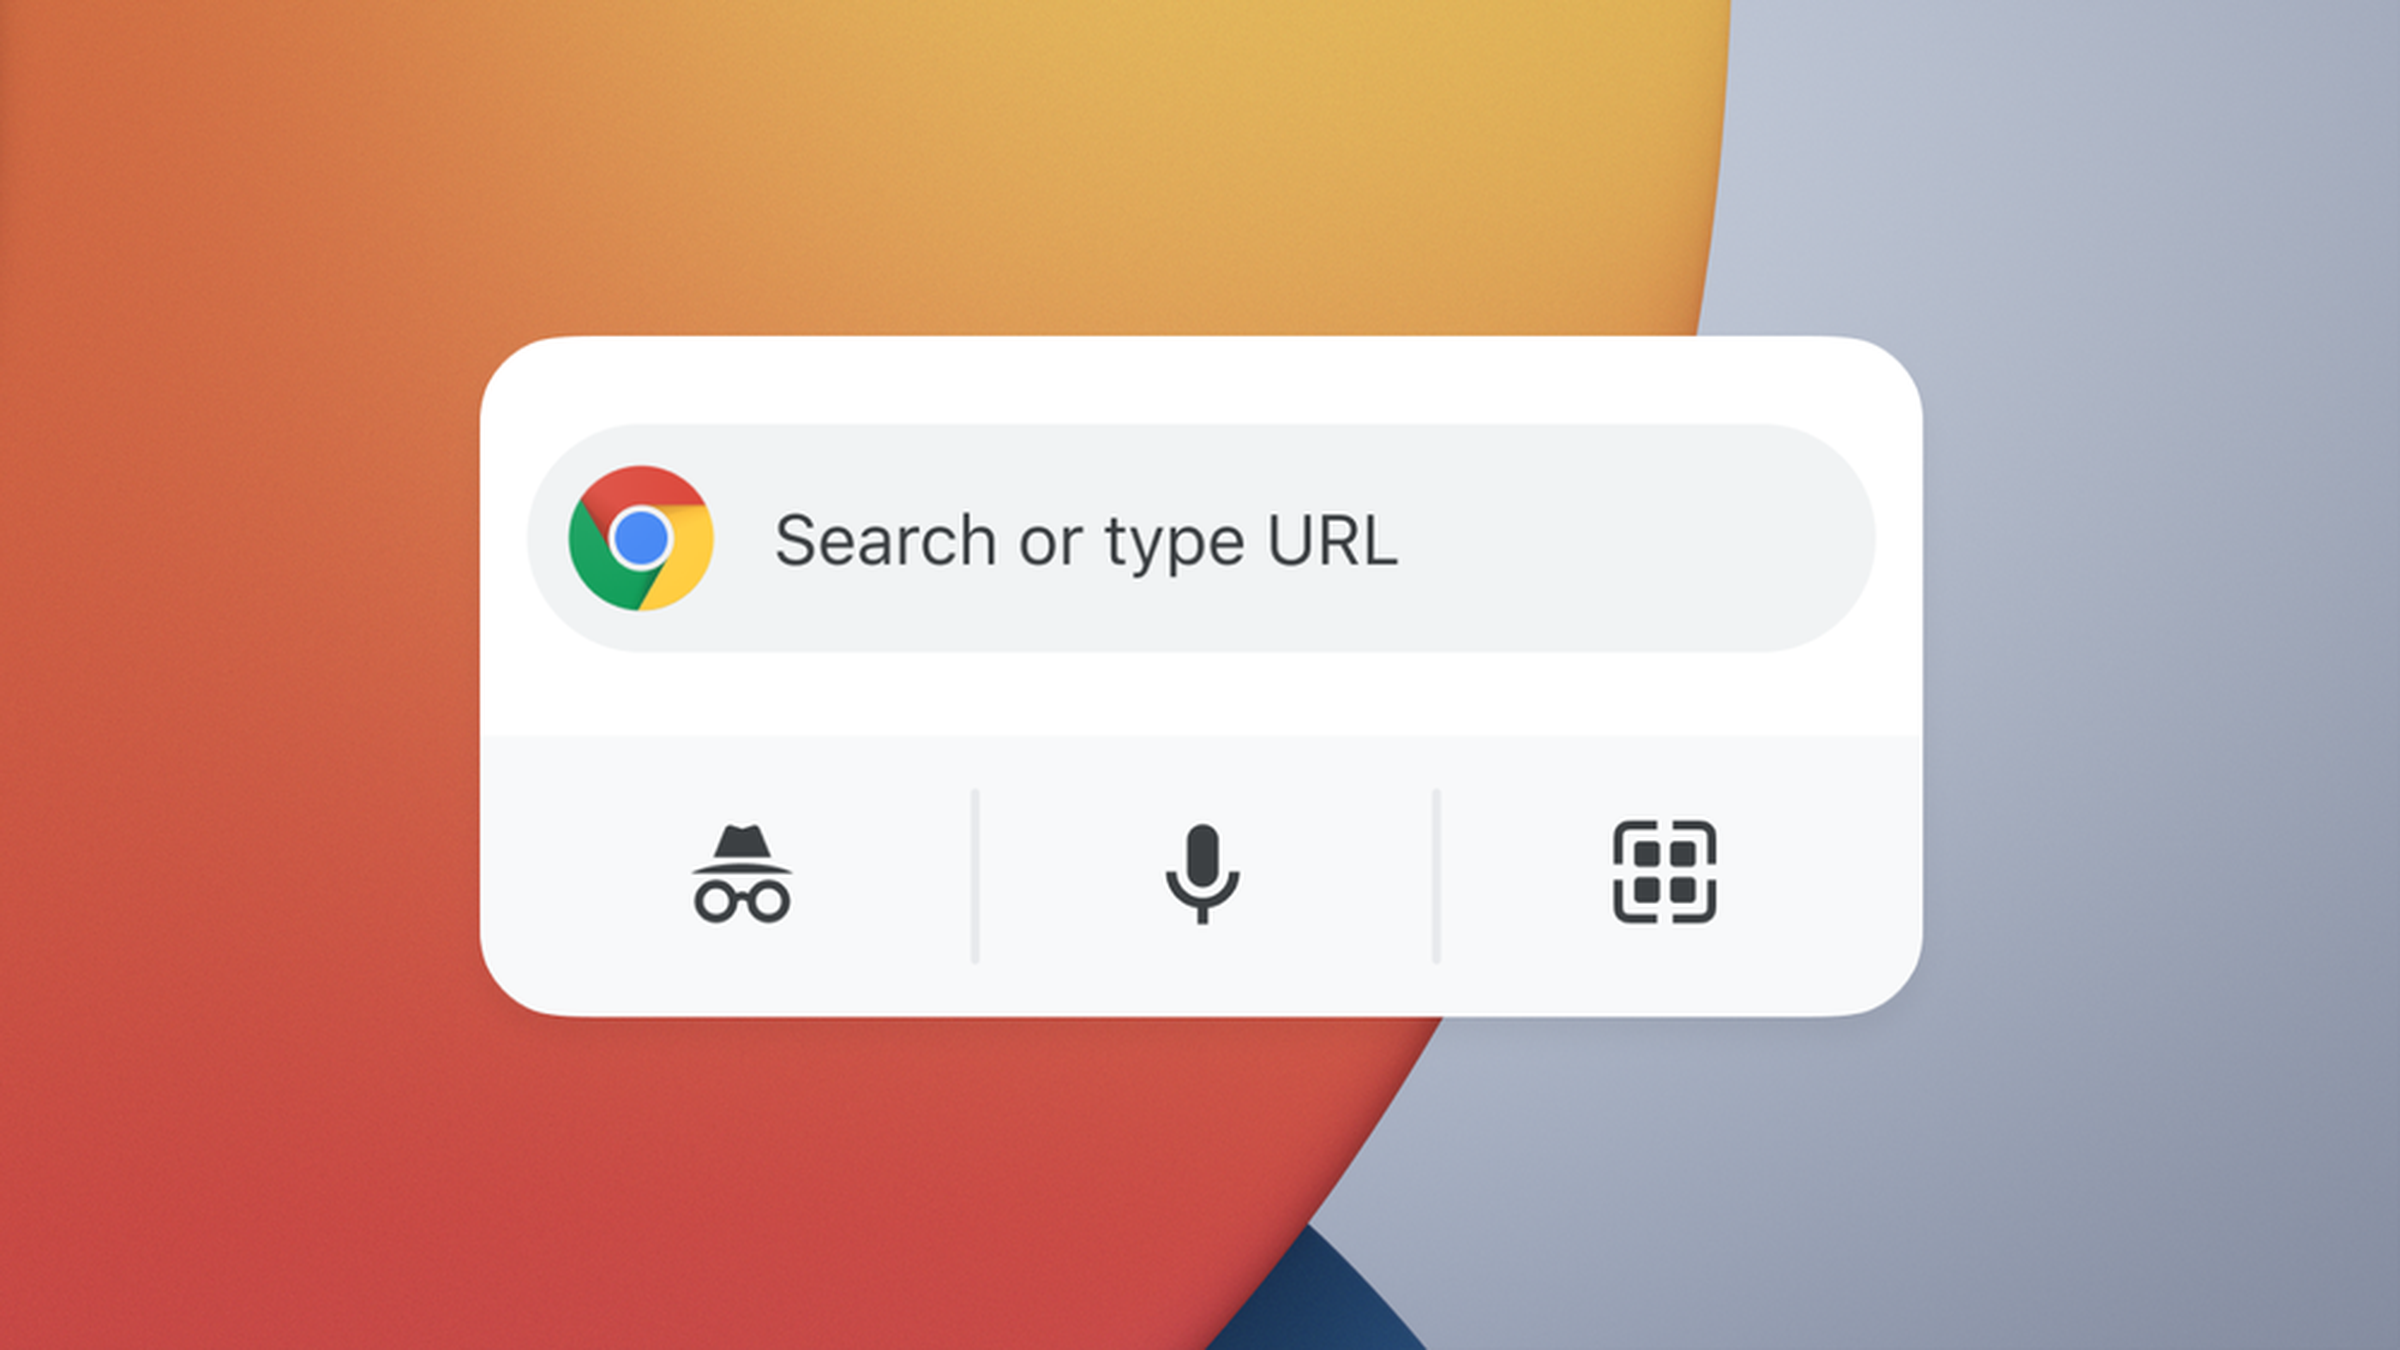 Chrome’s widget provides a quick link to search.